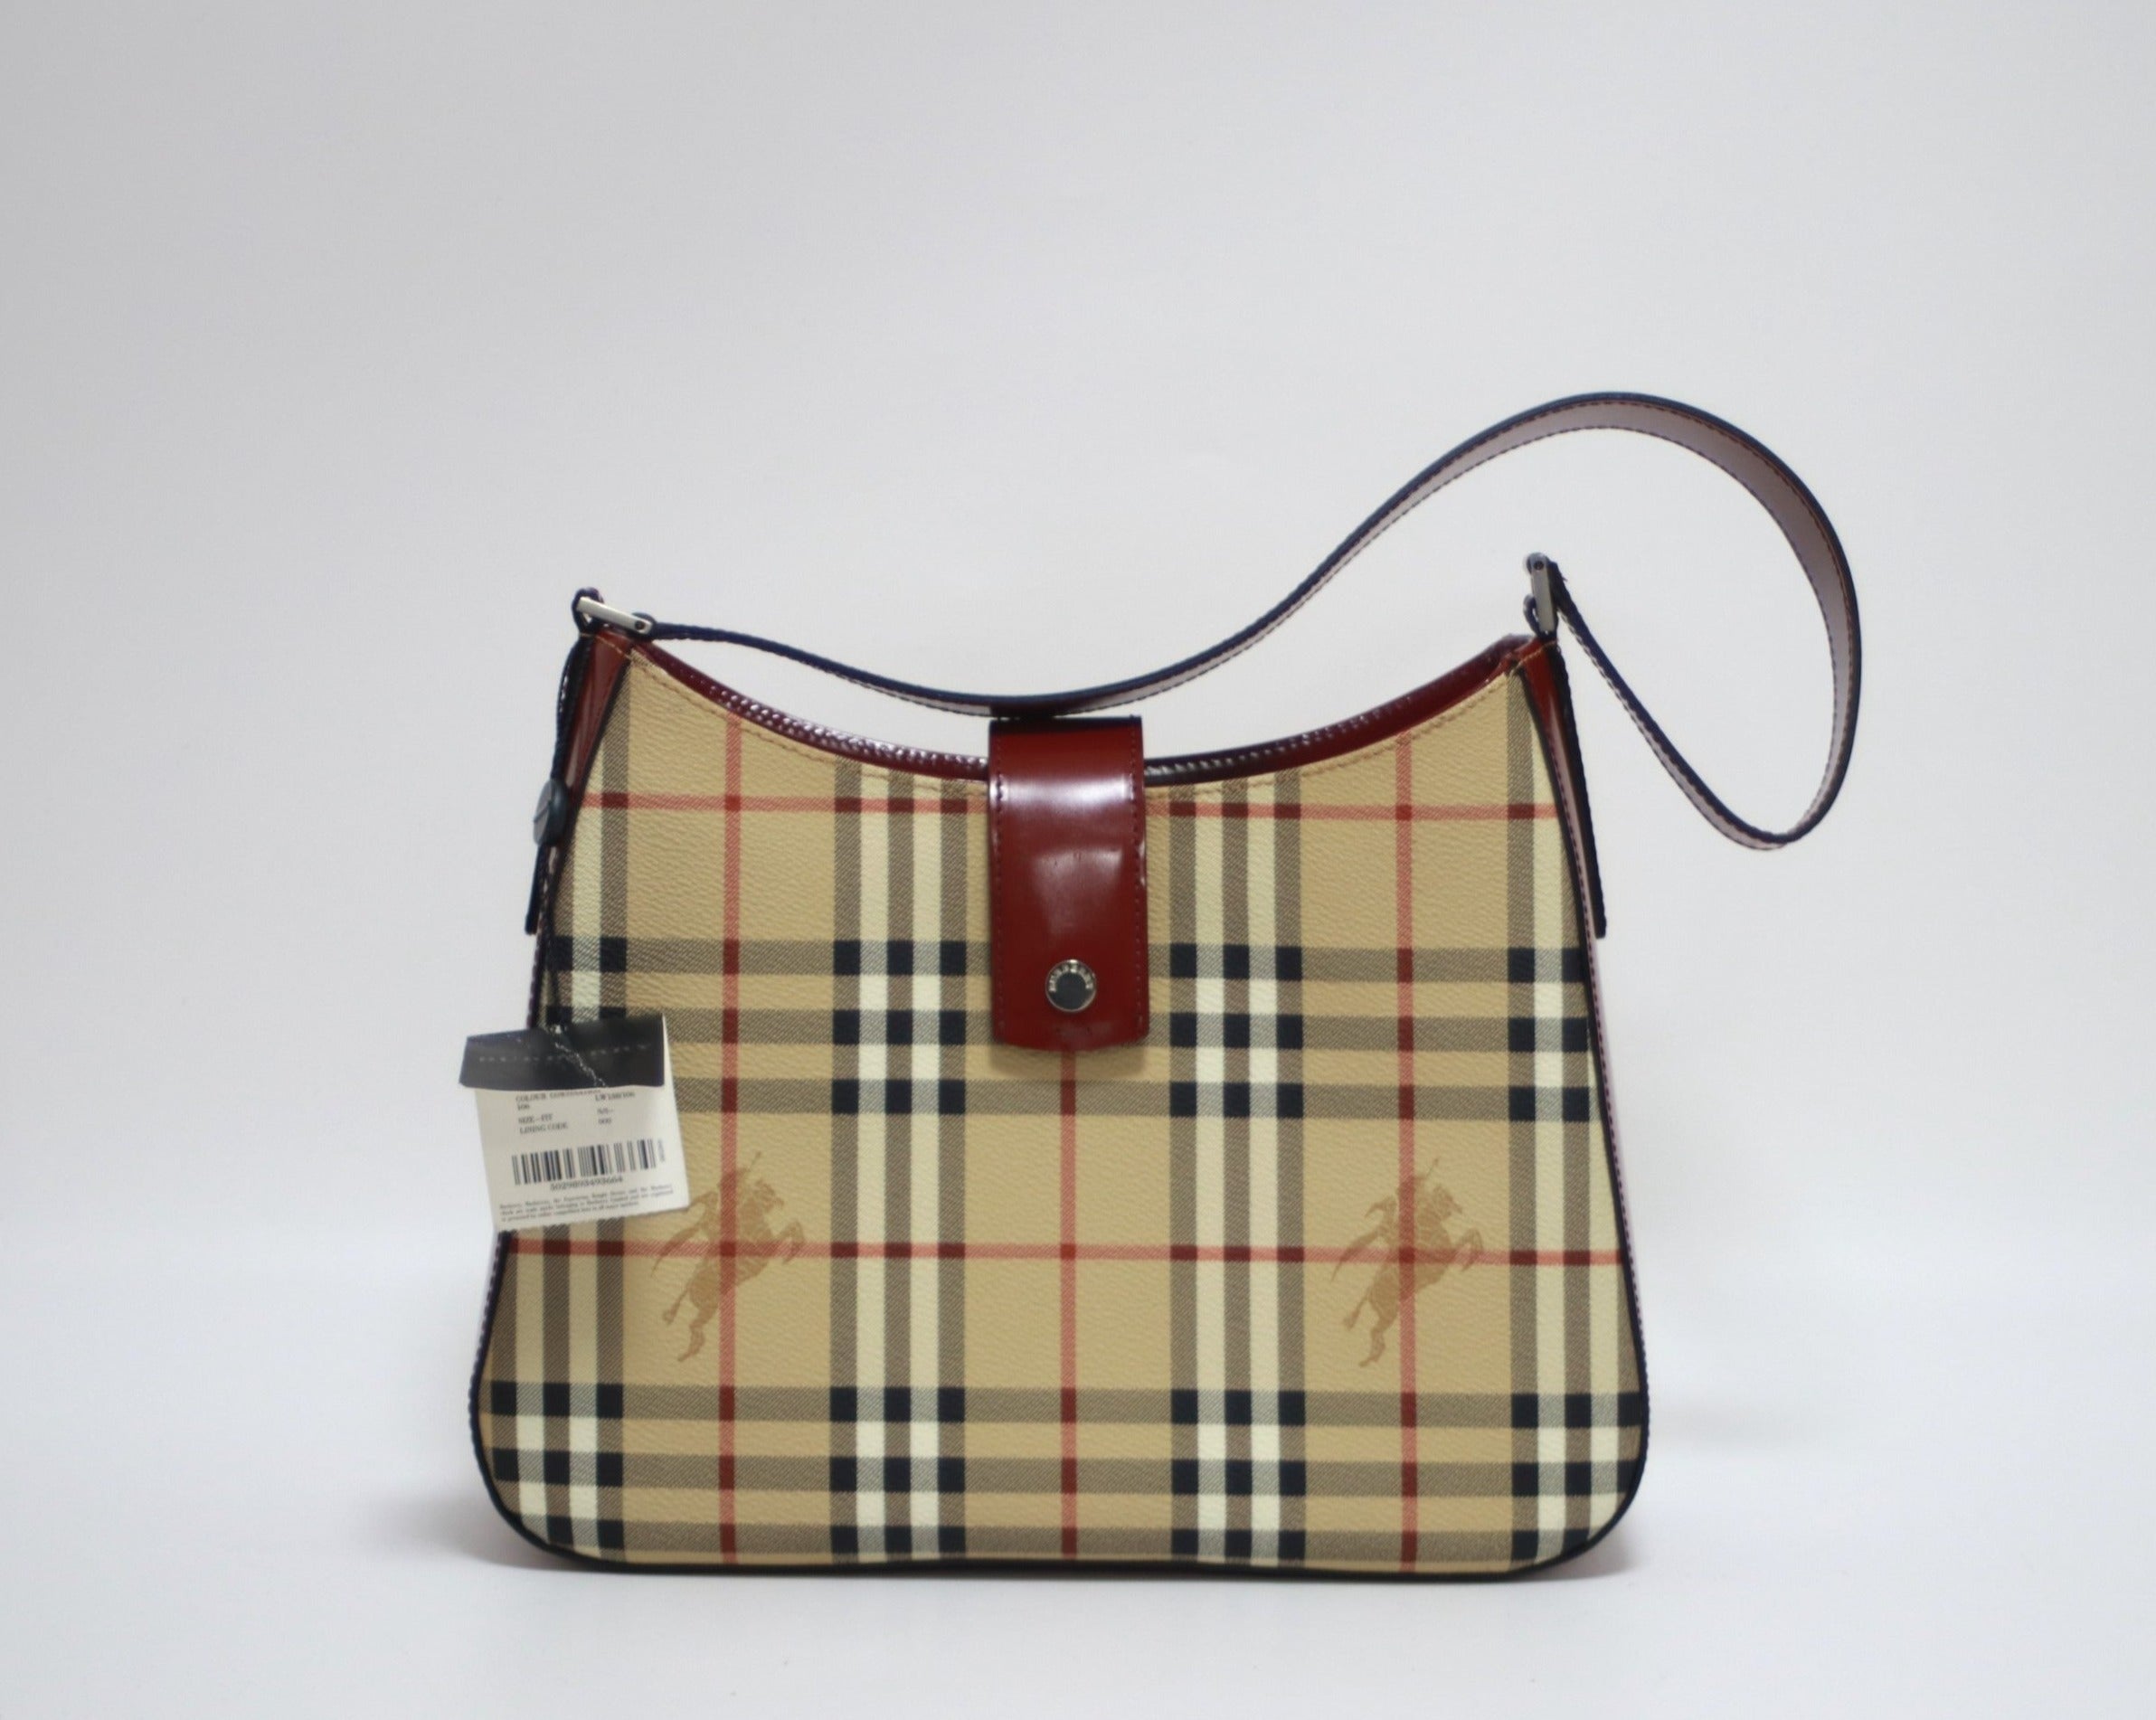 Burberry Shoulder Bag Beige and Red Used (7912)